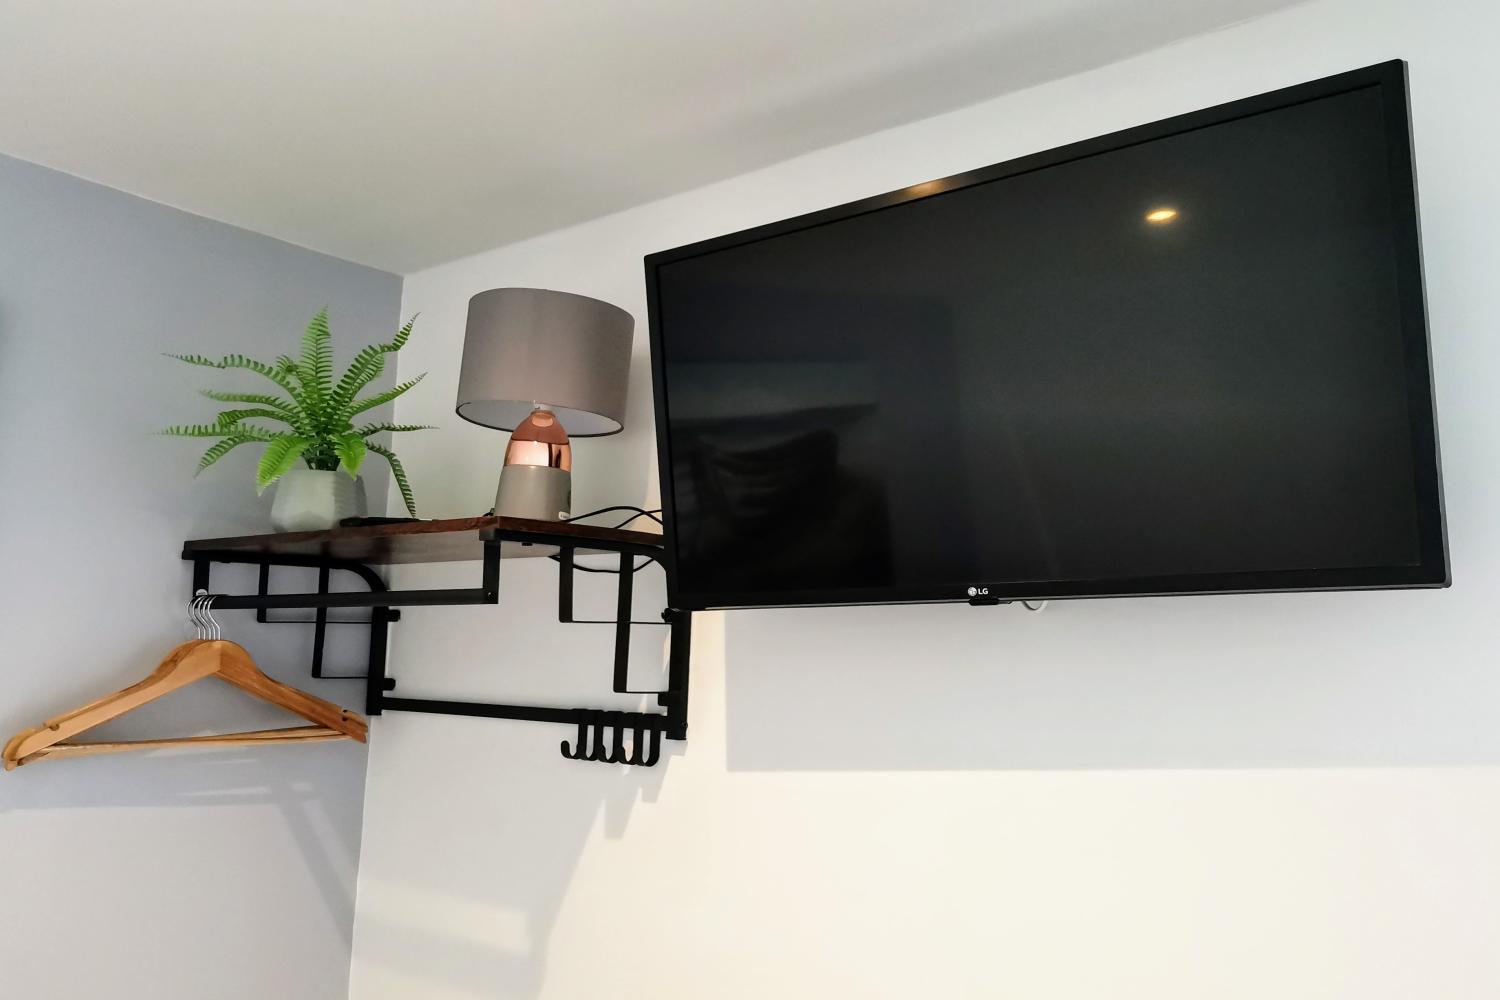 Smart TV, lamp, shelf with hangers underneath for clothes